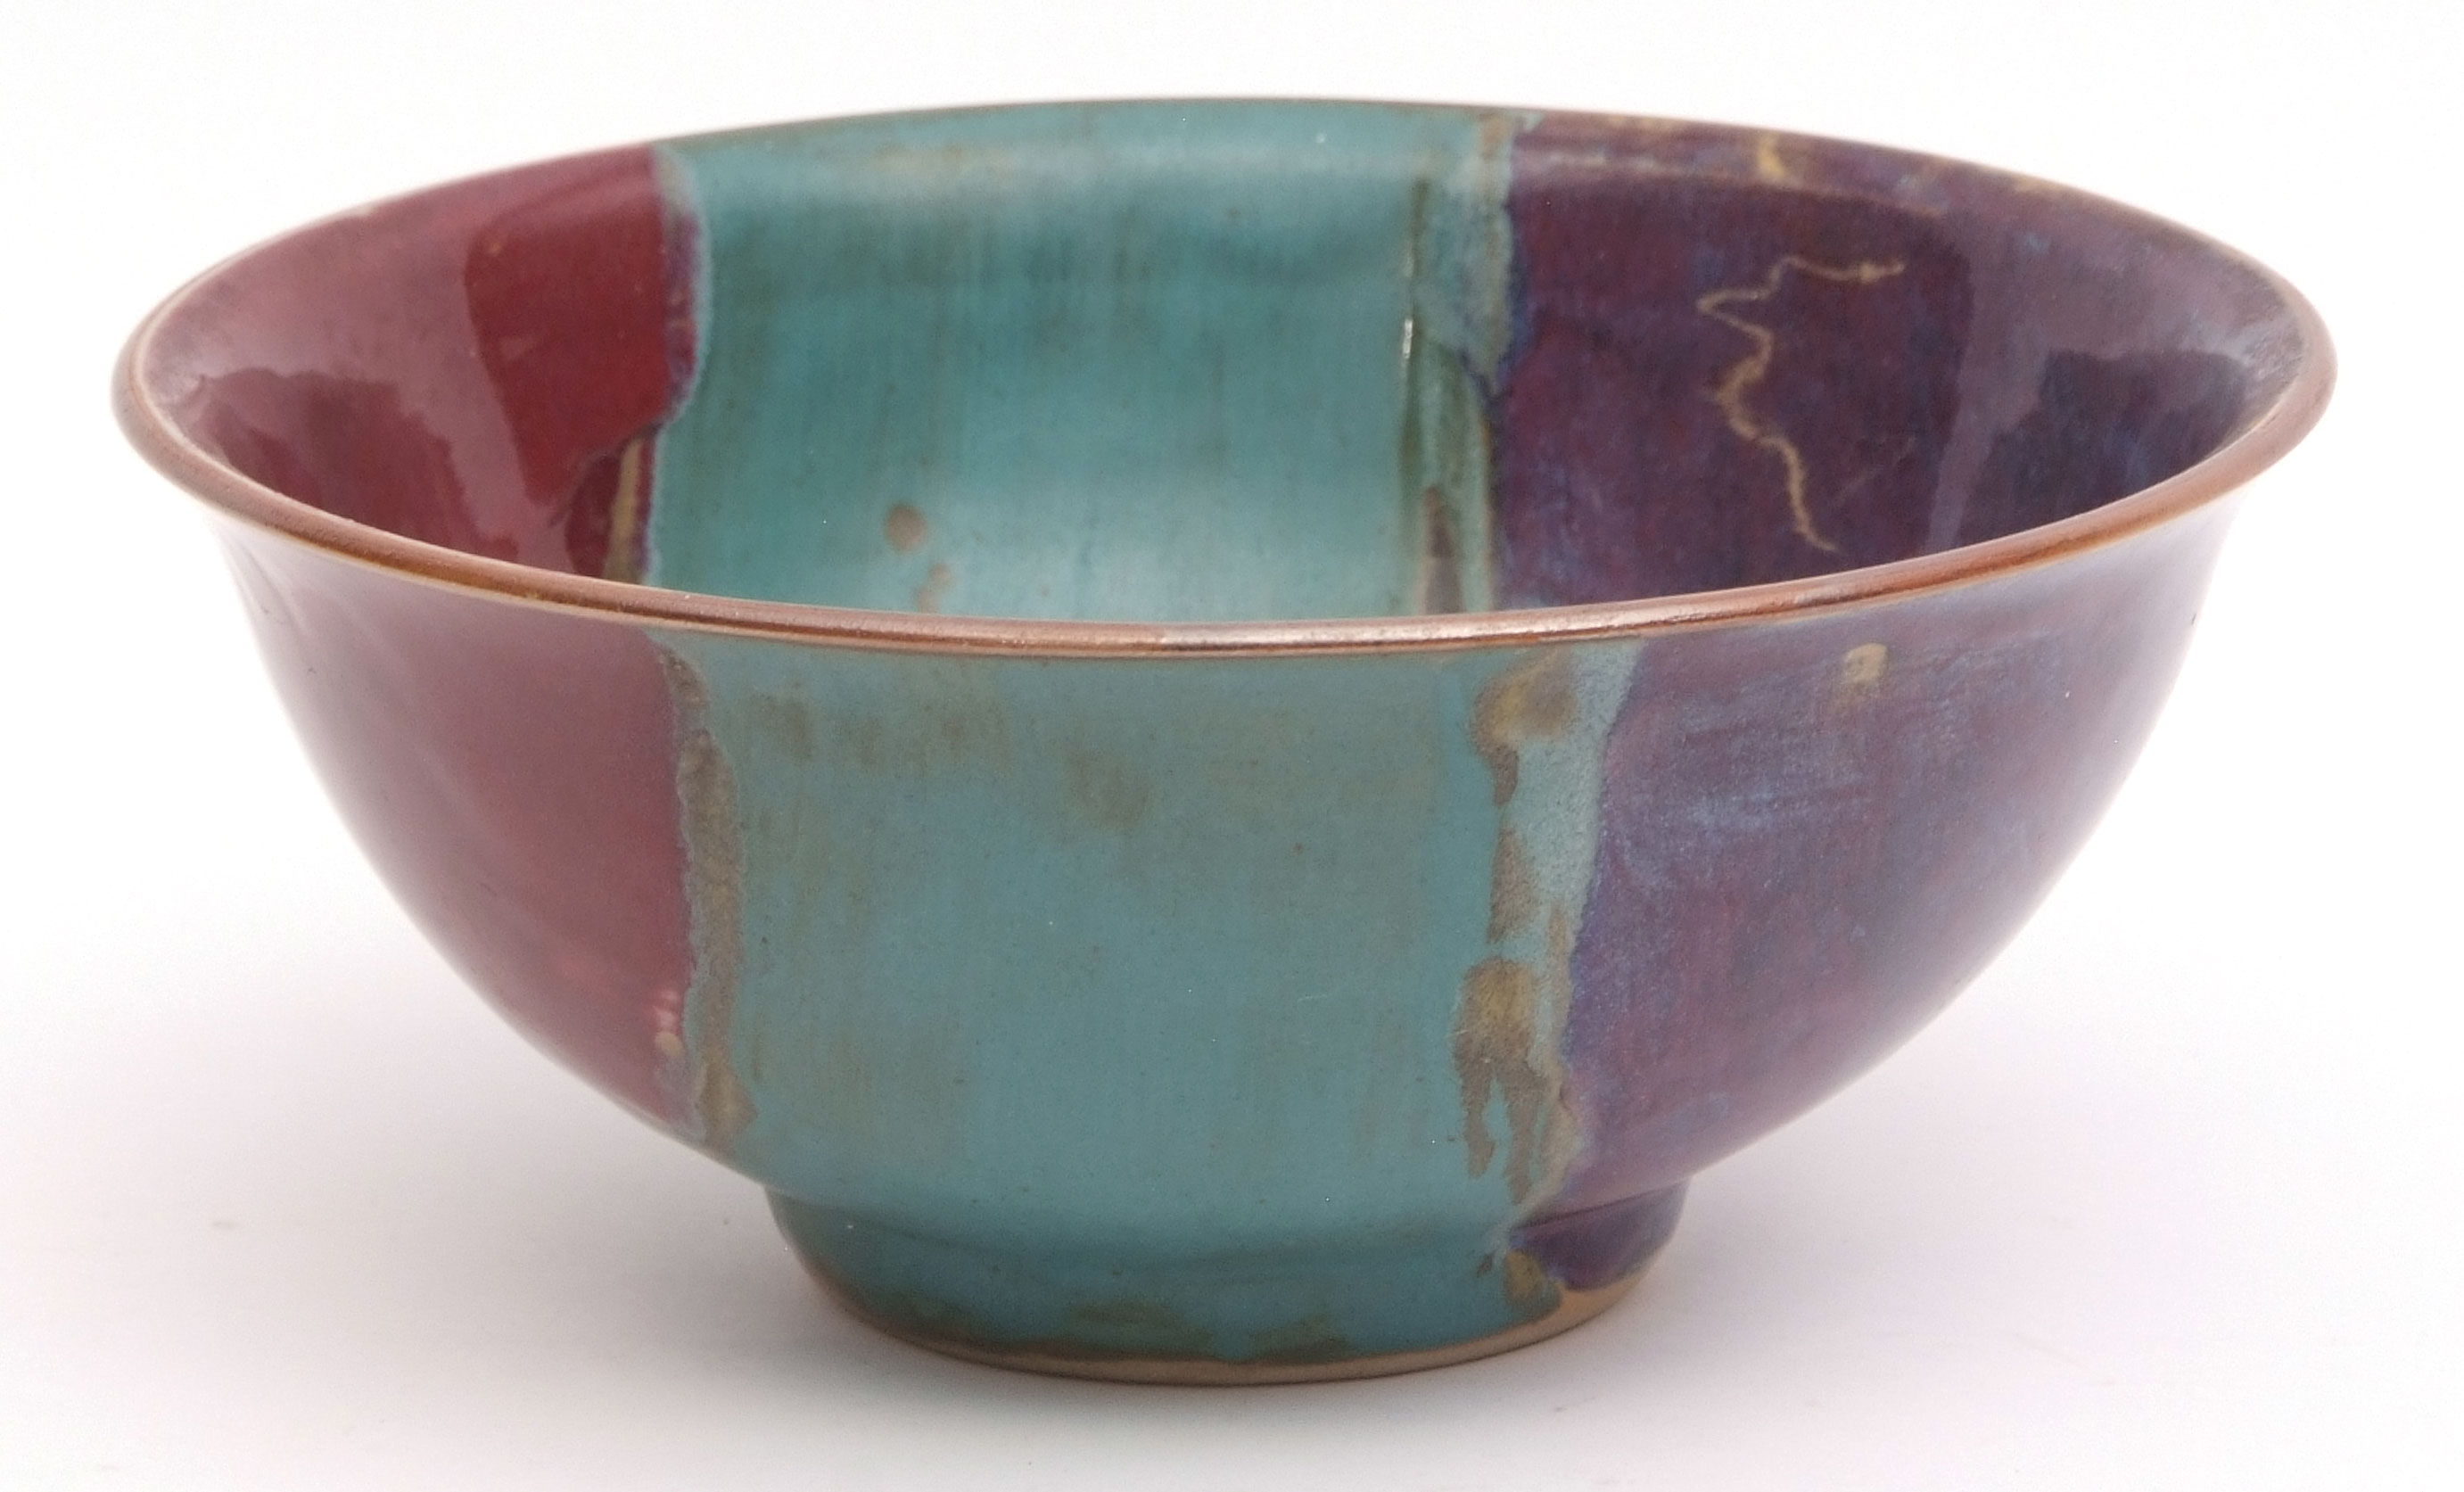 Unusual Chinese studio porcelain bowl with three distinct bands of flamb glaze in sang de boeuf,